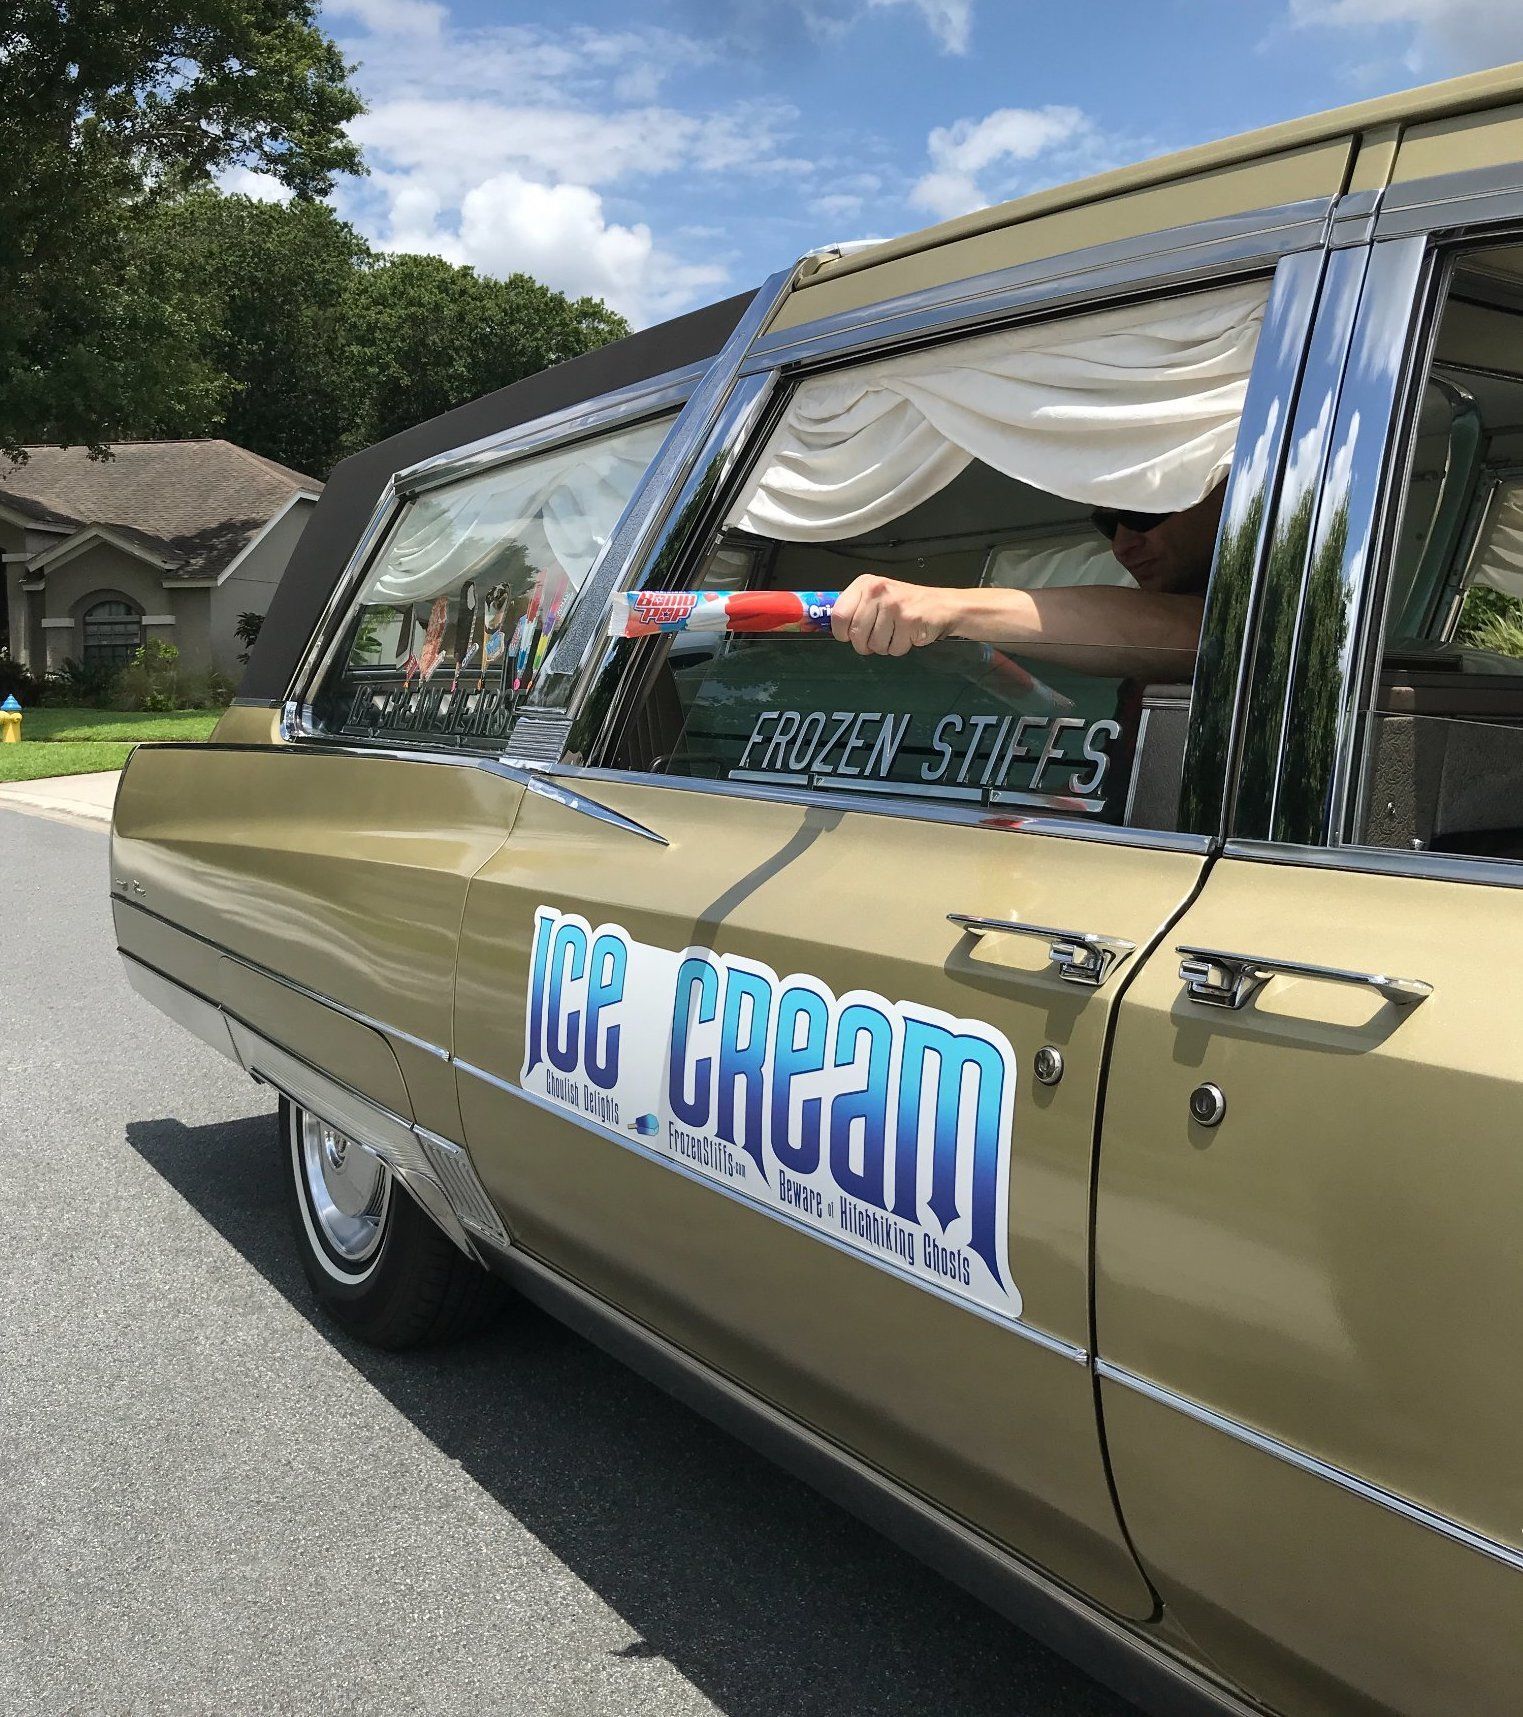 A man's hand holds a popsicle out the window of an ice cream hearse.